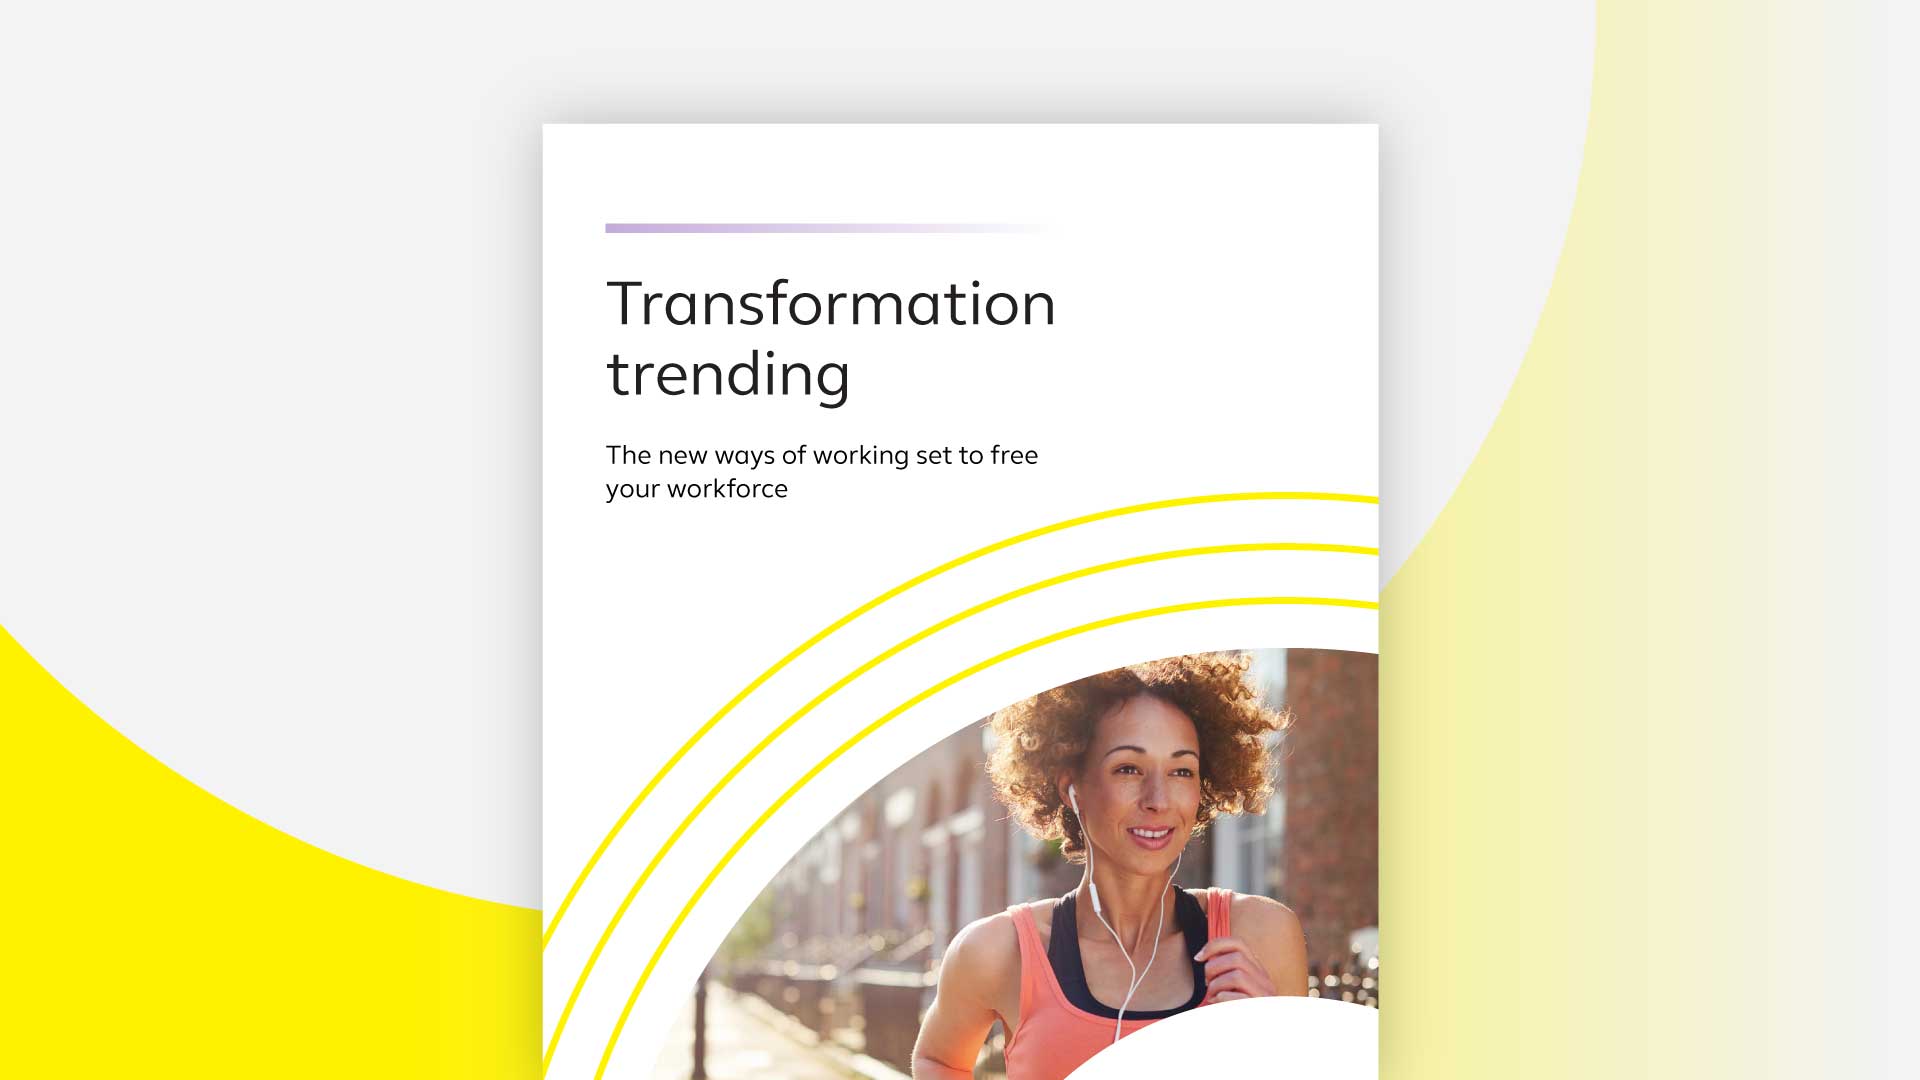 Transformation trending and the recent workplace trends